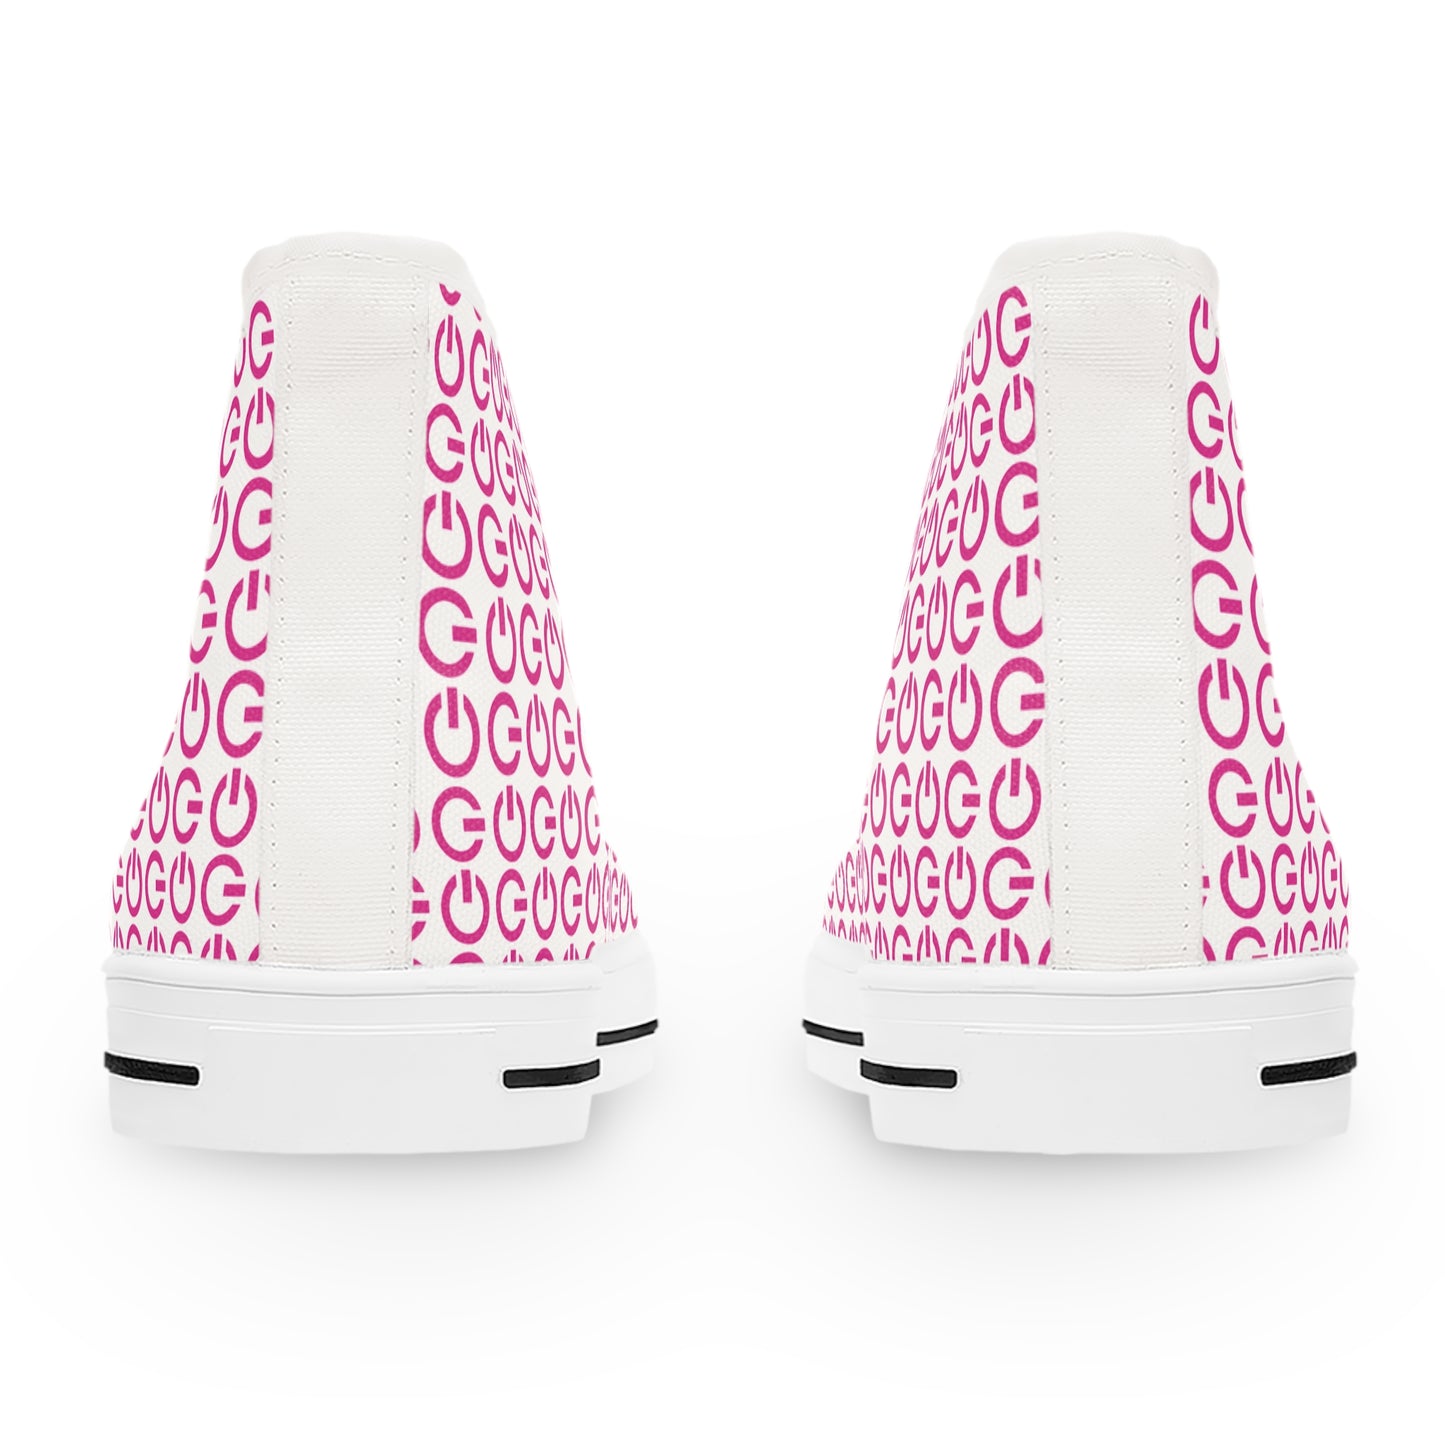 GoGirl High Top Sneakers with G Power Logos